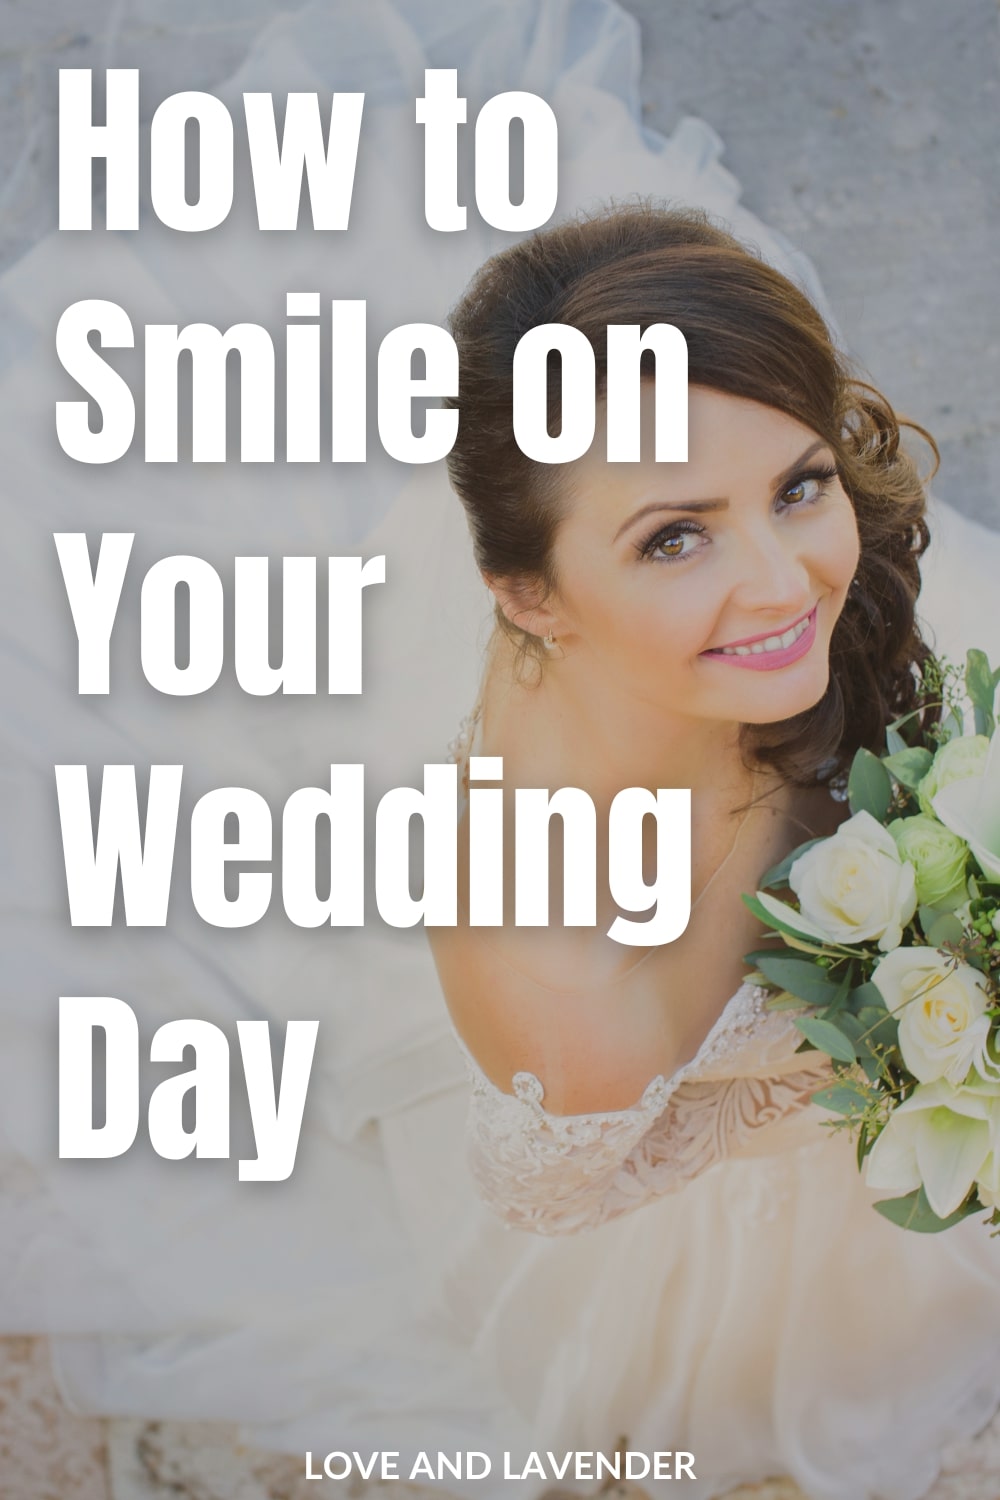 How to Straighten your Teeth at Home for the Perfect Wedding Day Smile!